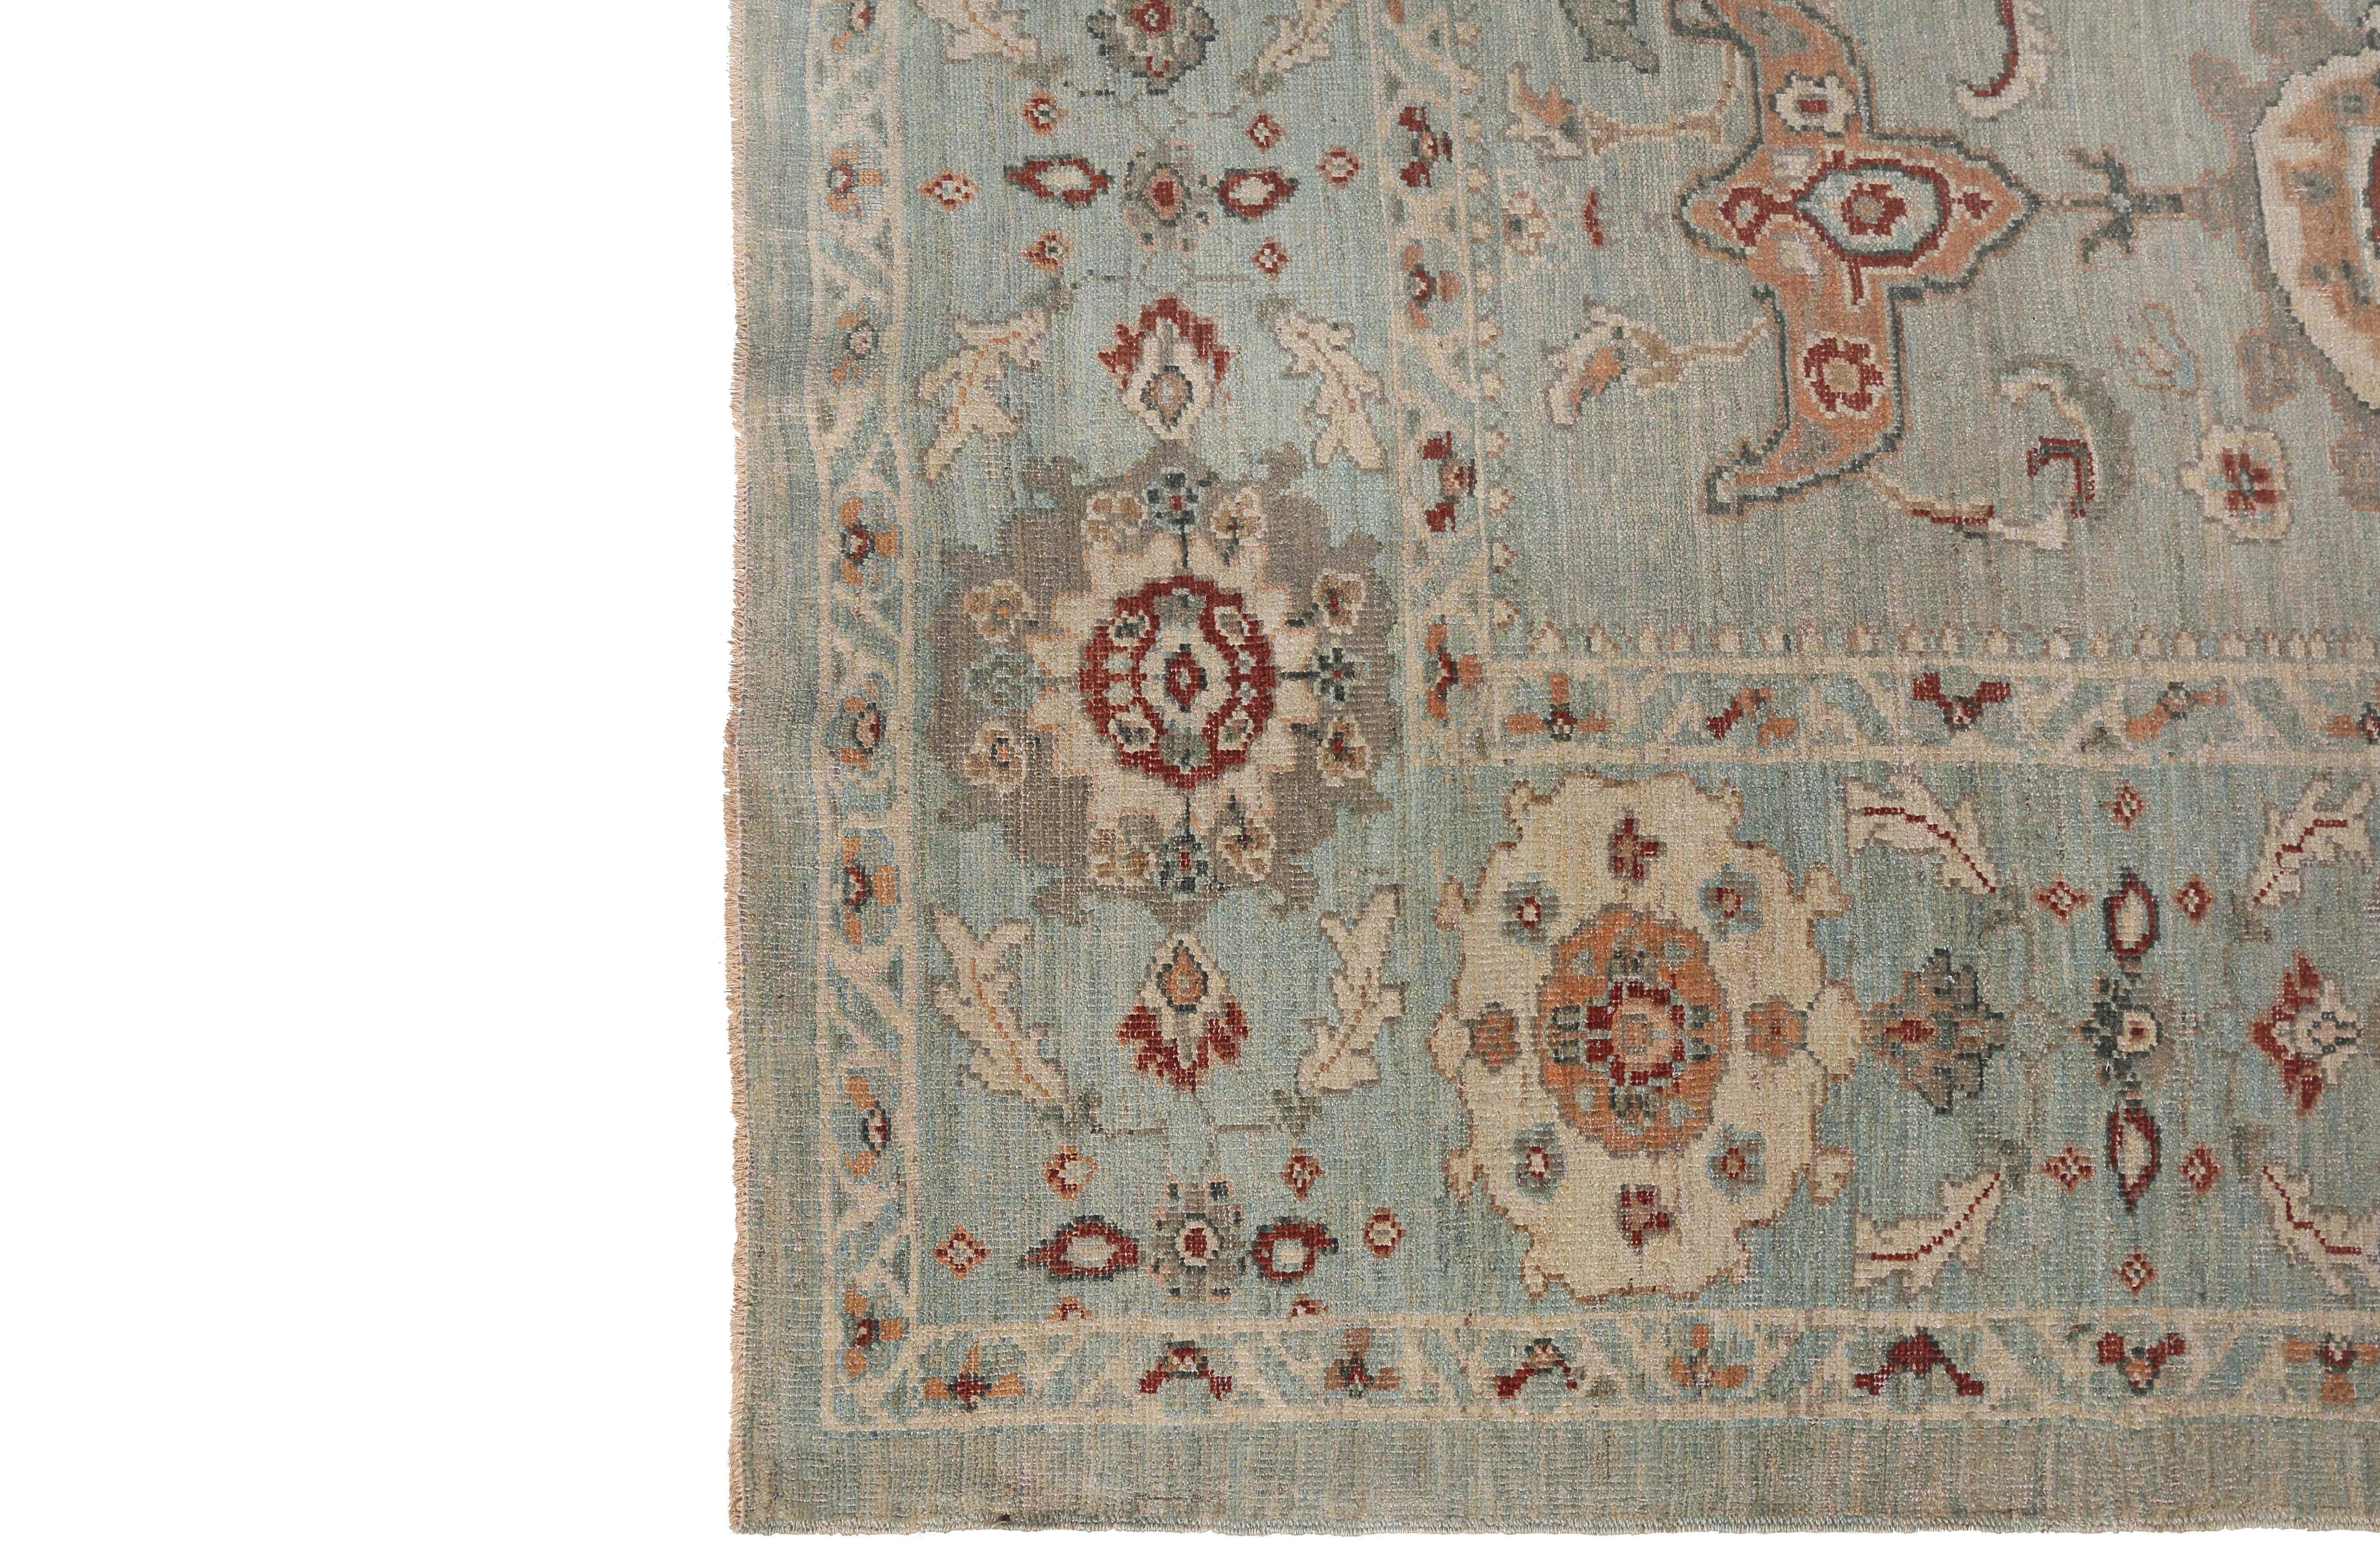 Introducing the exquisite Turkish Sultanabad Rug, measuring 8'6